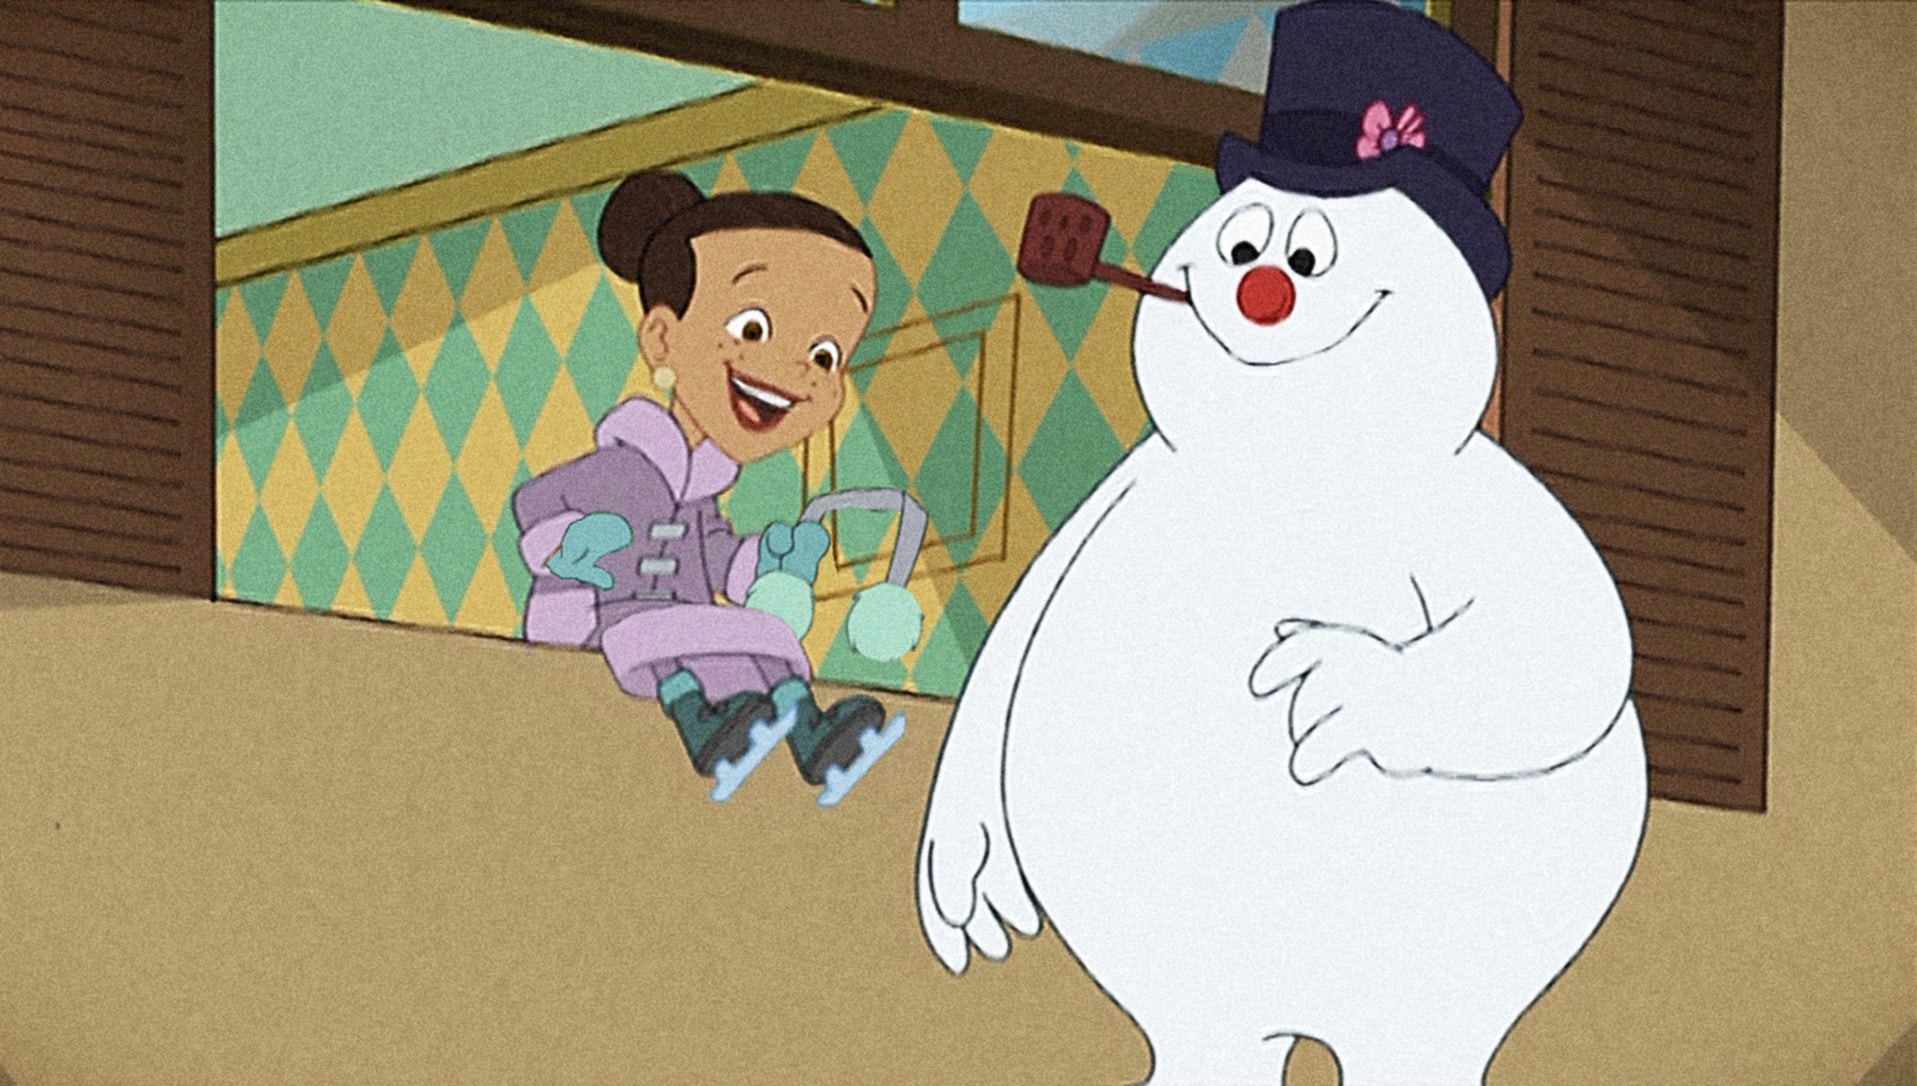 THE LEGEND OF FROSTY THE SNOWMAN, l-r: Sara, Frosty the Snowman, 2005